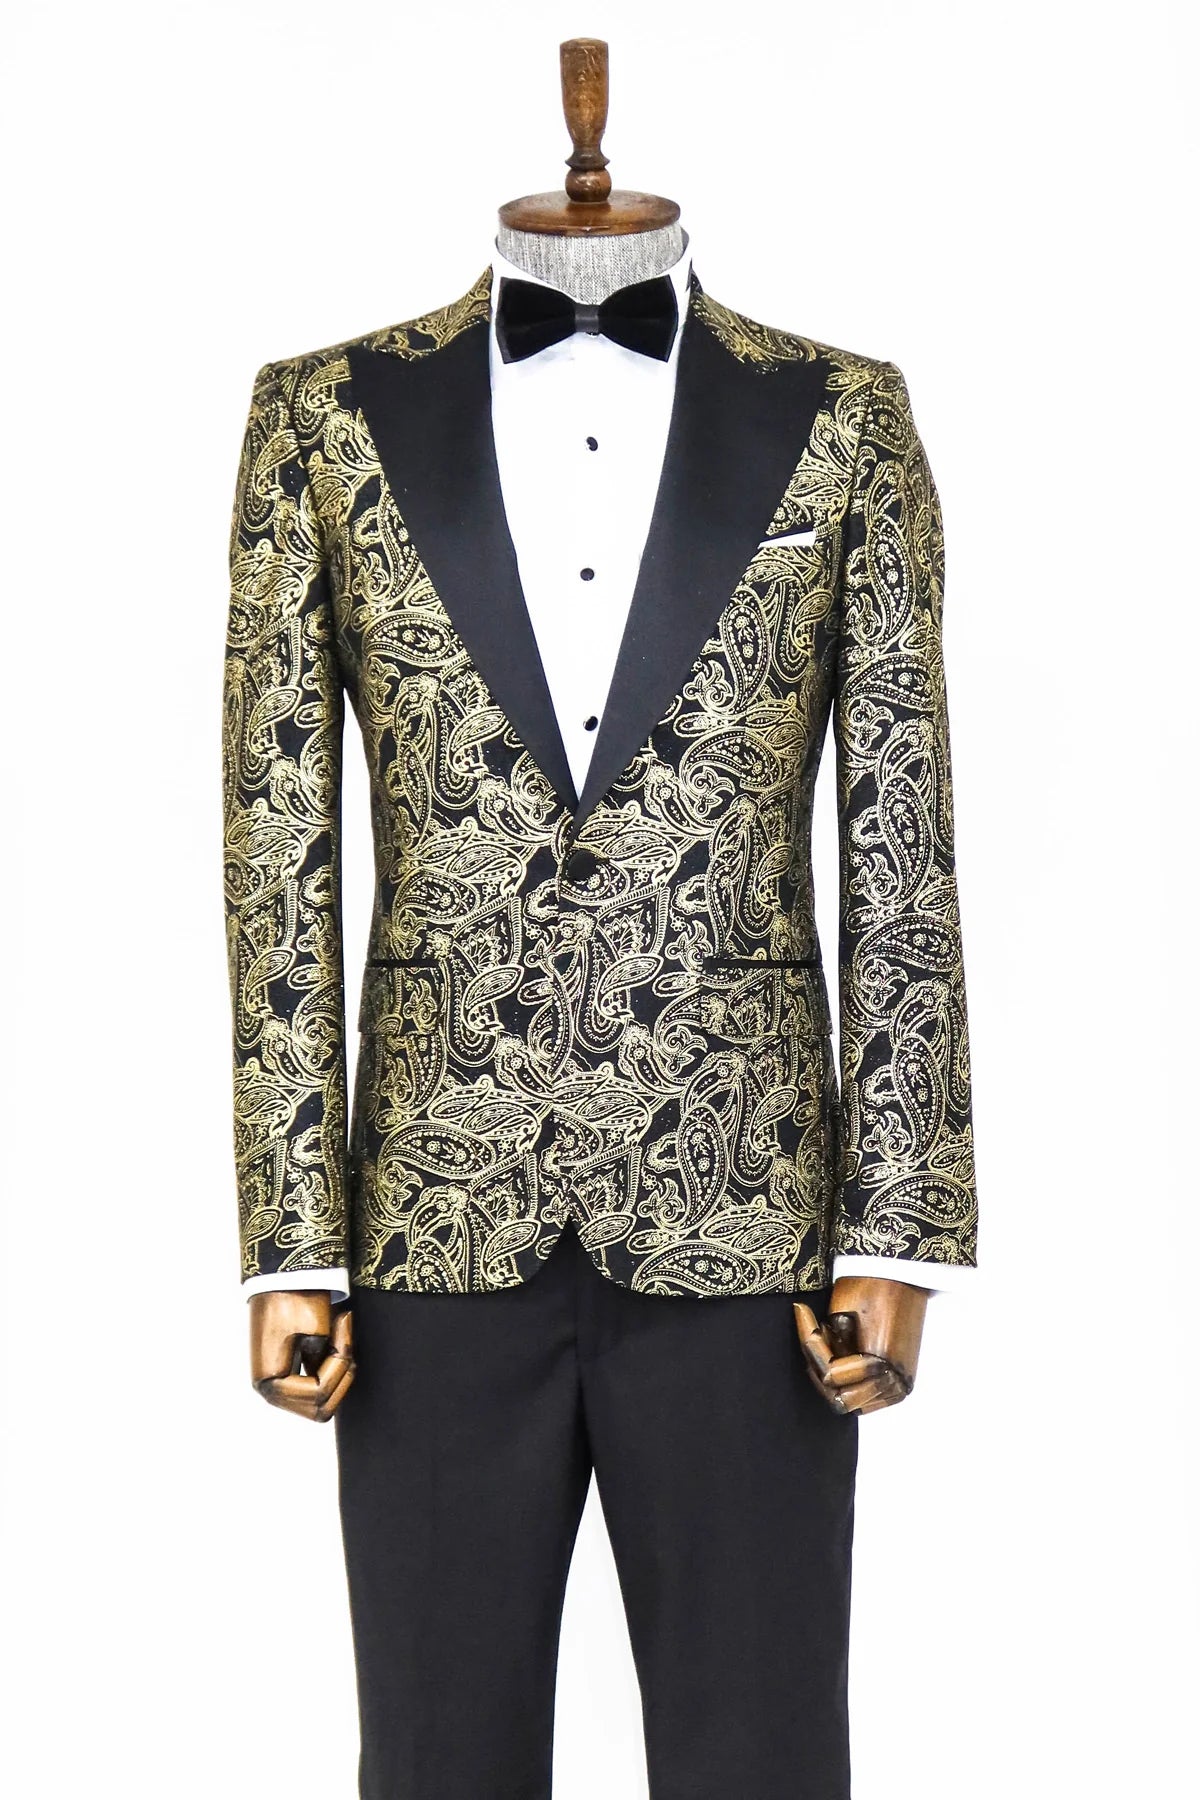 Golden Paisley Black Prom Blazer with Peak Lapel, perfect for proms and other formal events, available exclusively at KCT Menswear.